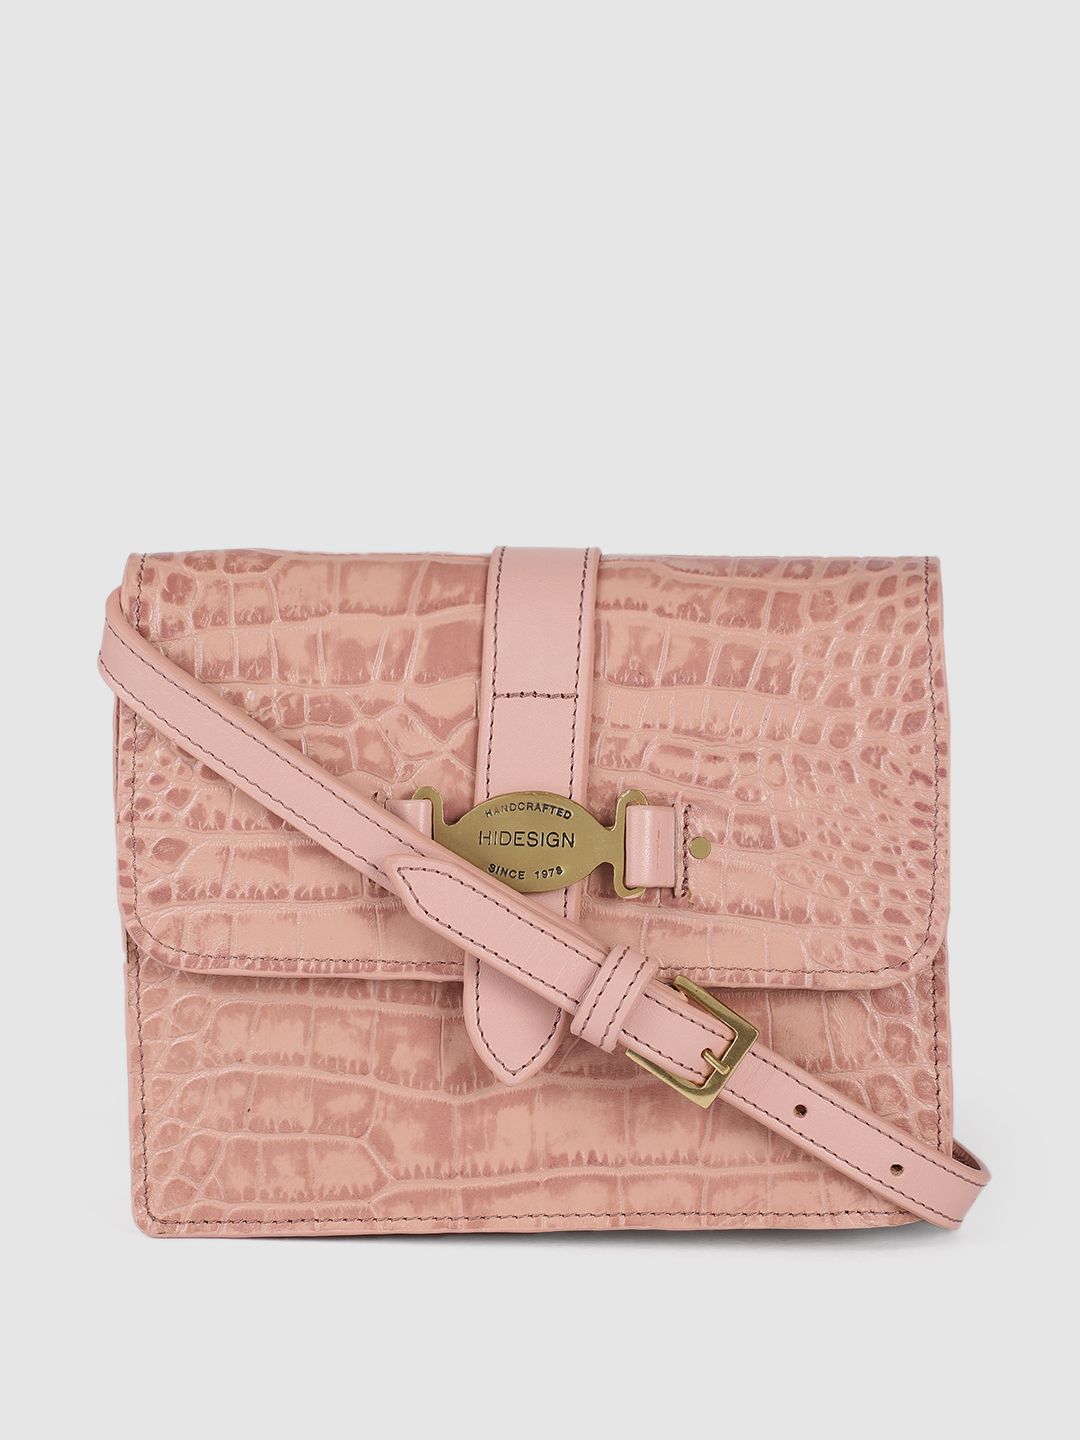 Hidesign Women Pink Textured Leather Sling Bag Price in India